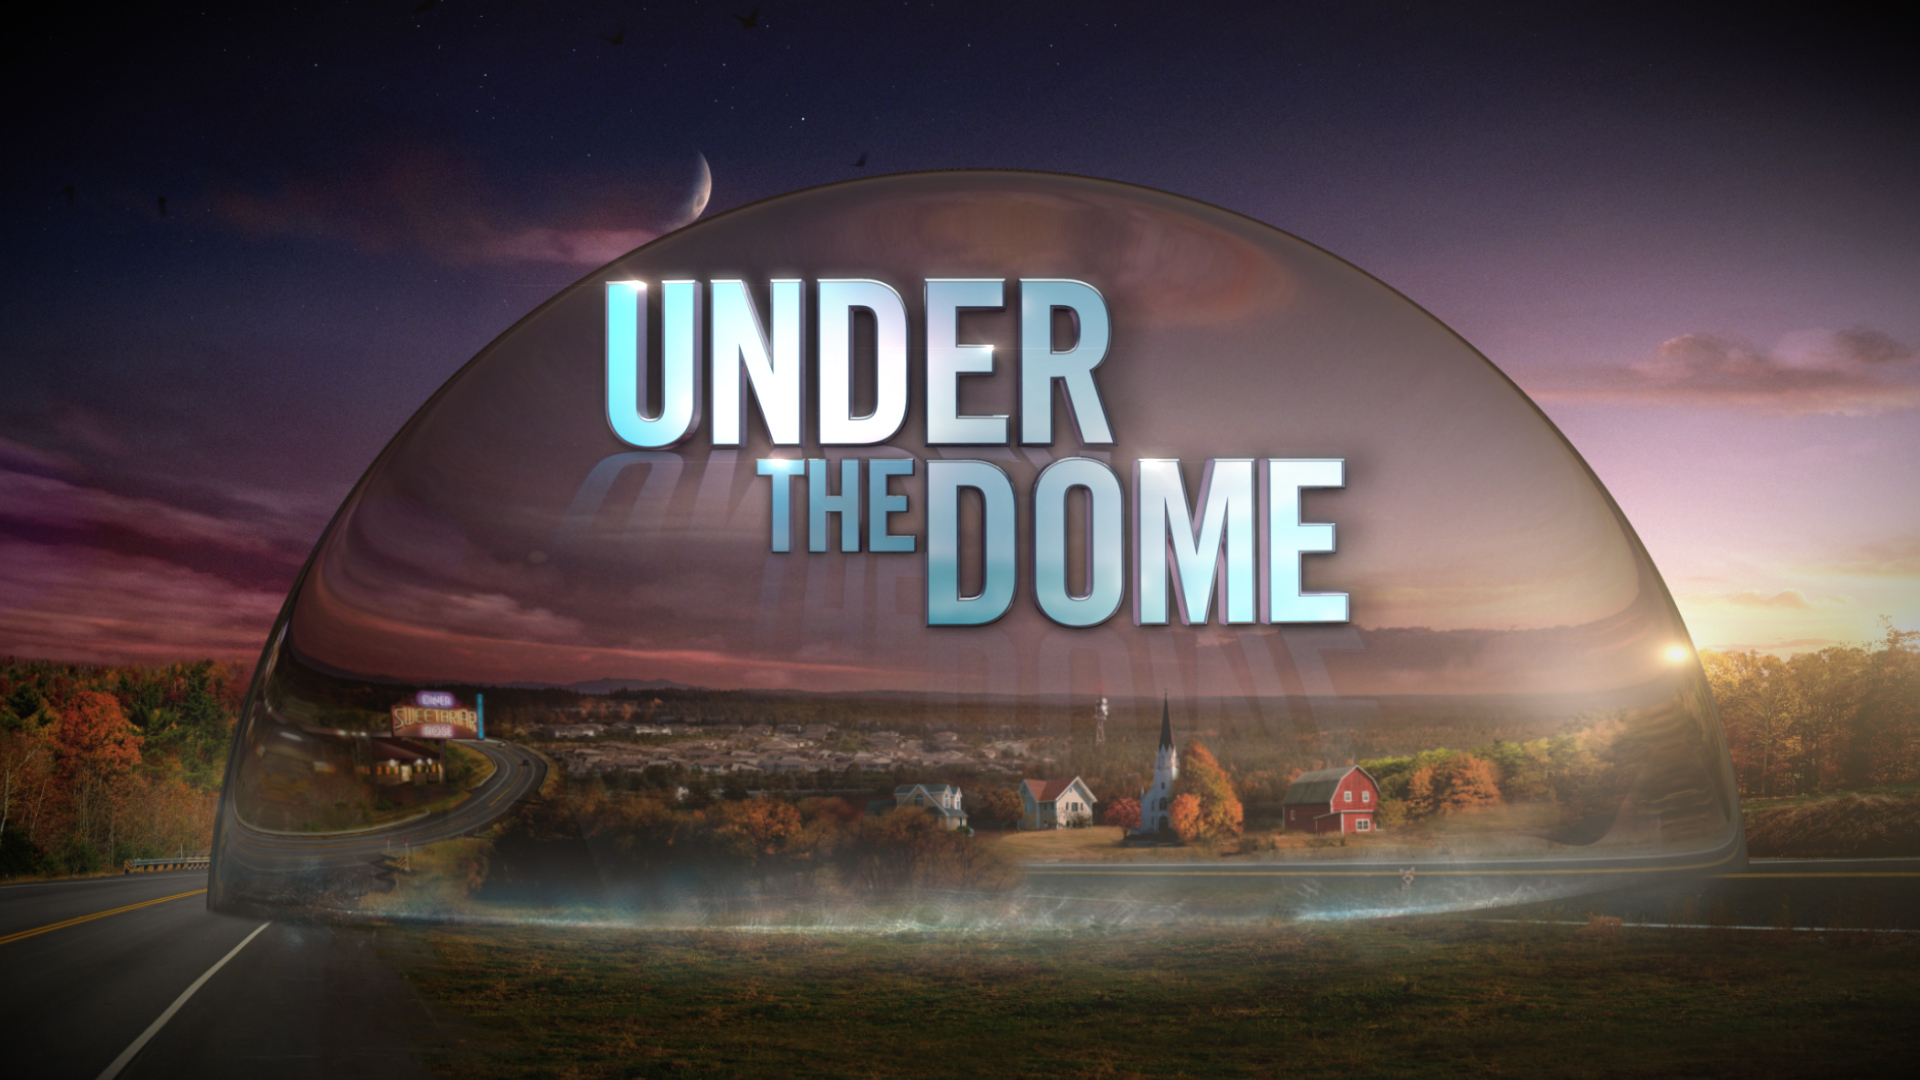 http://img2.wikia.nocookie.net/__cb20130720142458/stephenking/images/6/6e/Under_the_dome_logo.jpg